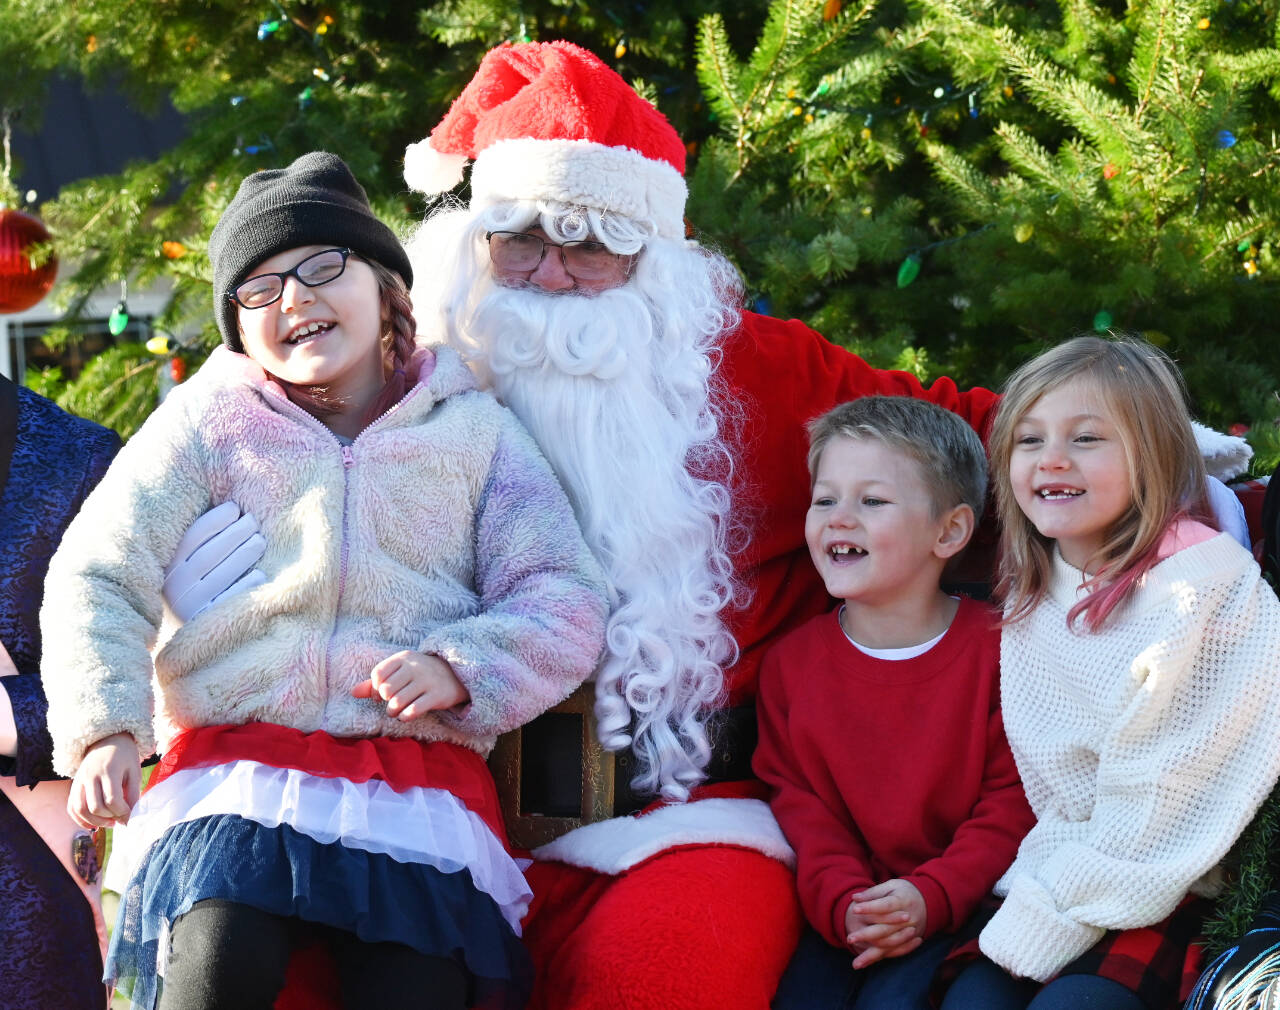 Sequim Gazette photo by Michael Dashiell / from left, Destiny, 7, Seth, 4, and Nora Summers, 6, of Sequim enjoy a moment with Santa Claus — who looks suspiciously like Stephen Rosales — at the Sequim Hometown Holidays event on Nov. 25.